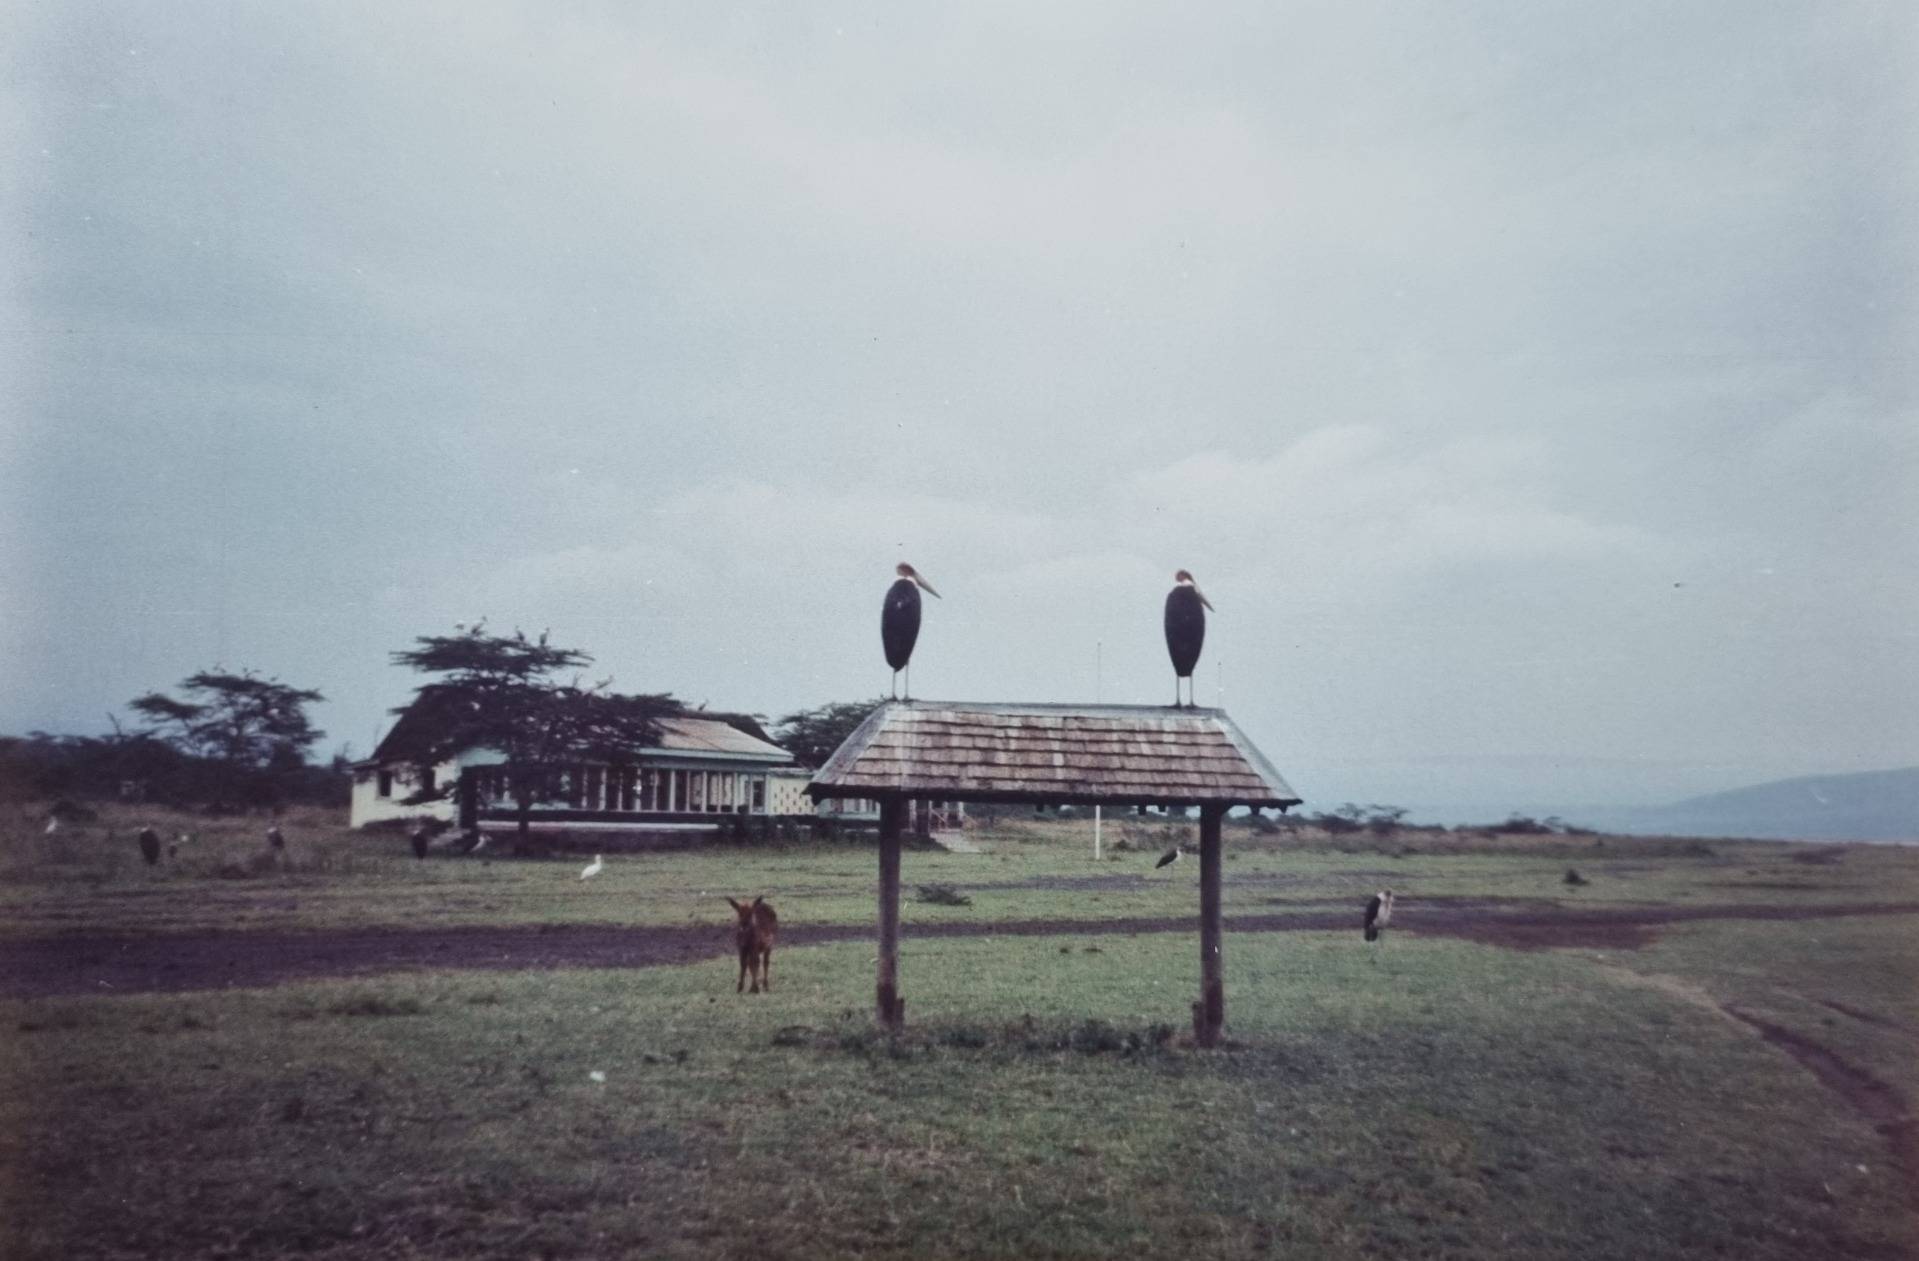 Even the birds are big in Africa. I think theses two are Marabou Storks